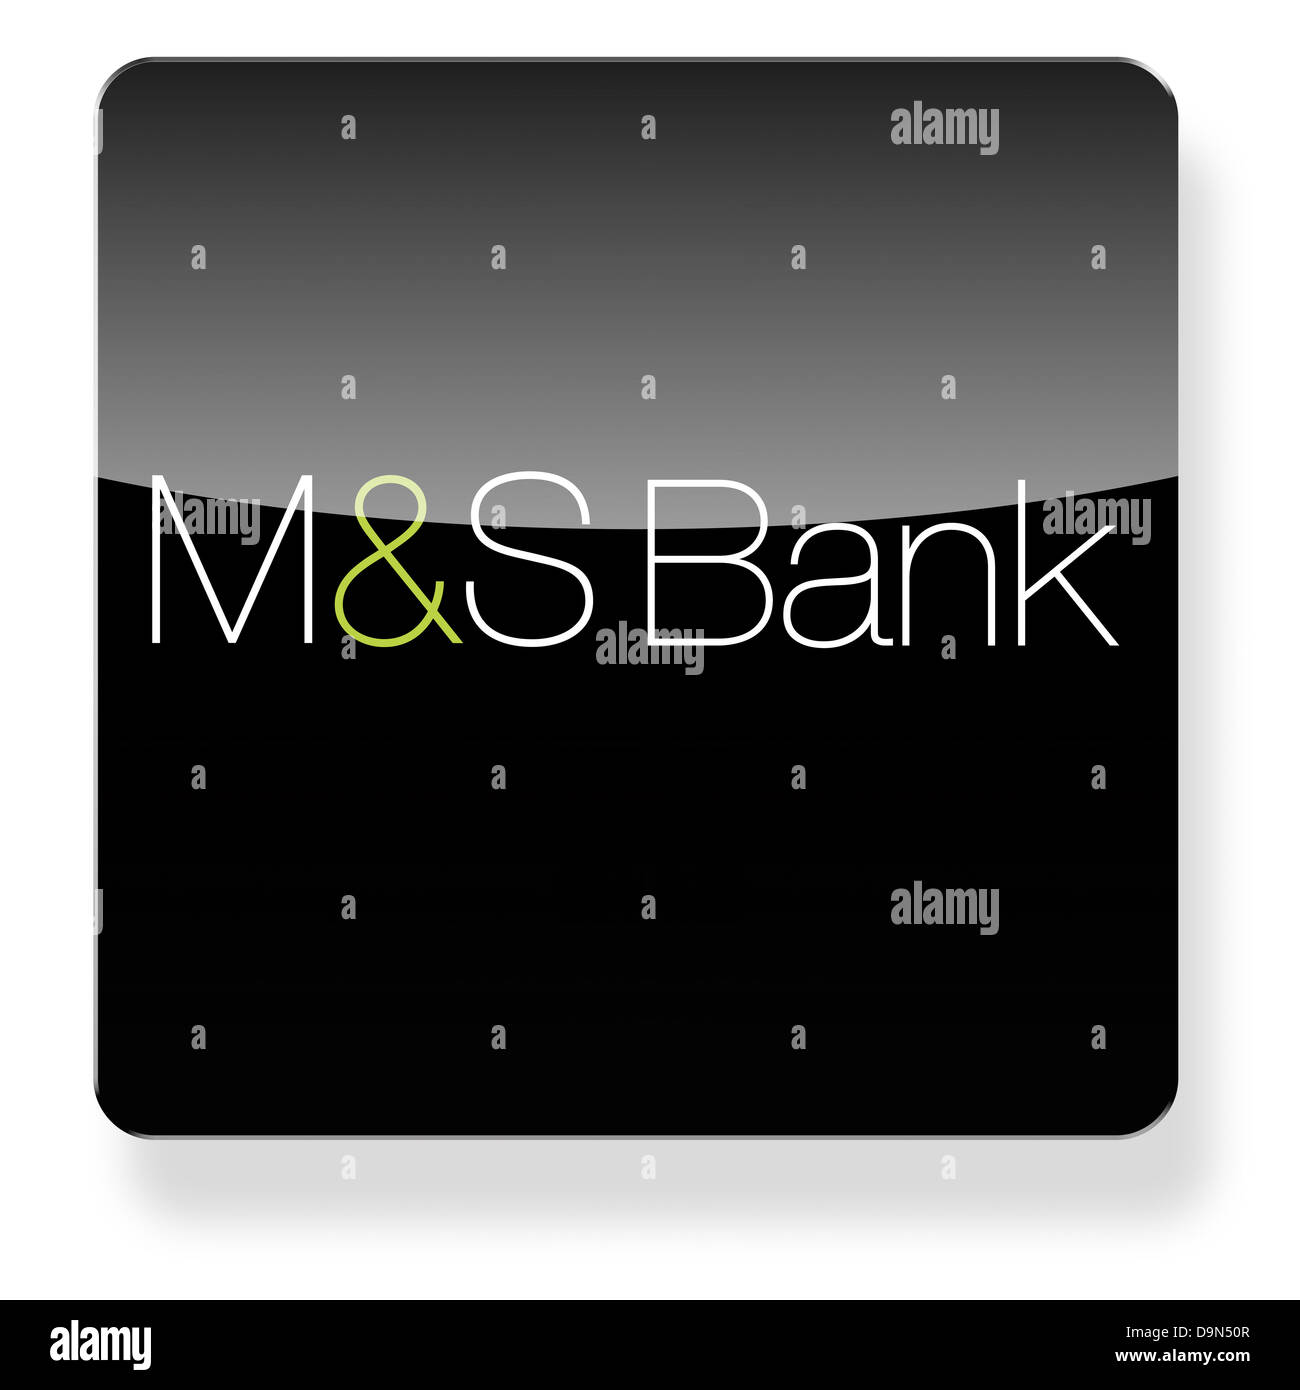 M&S Bank logo as an app icon. Clipping path included. Stock Photo